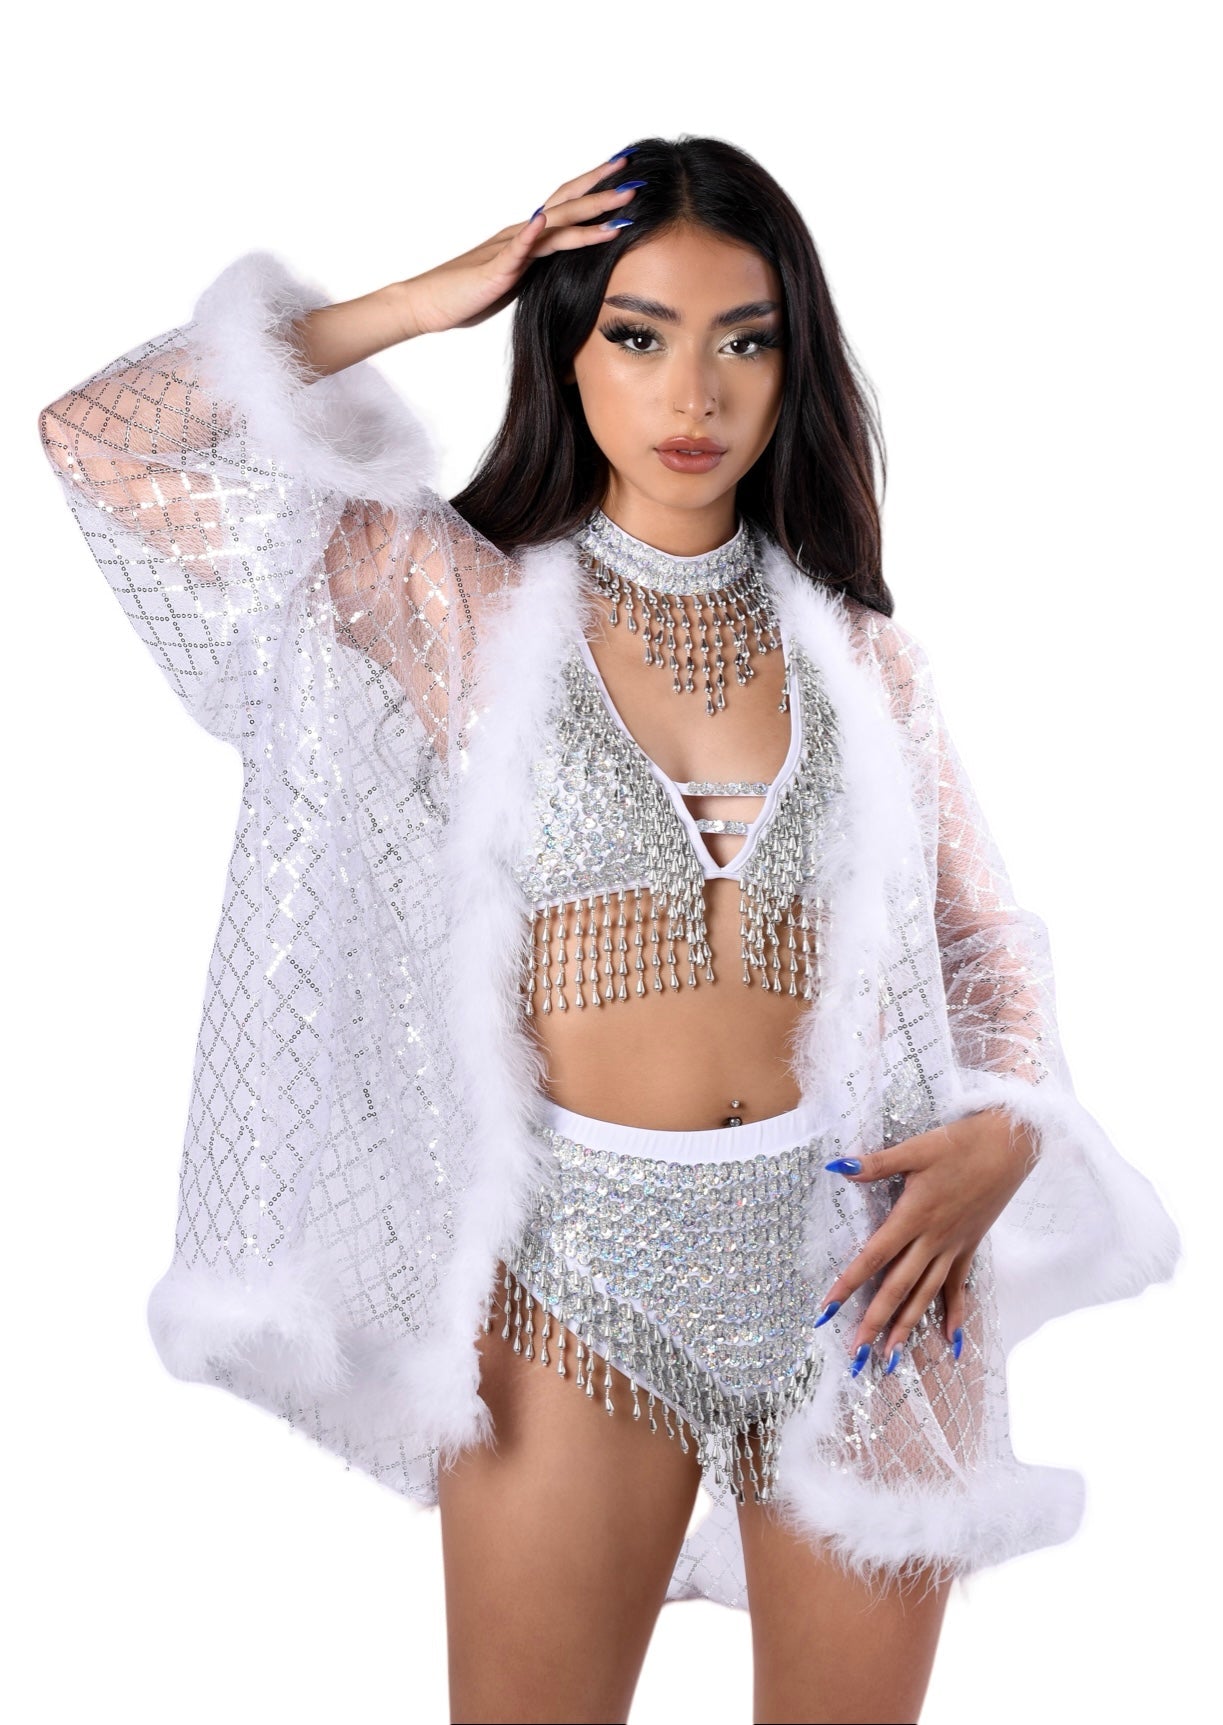 FULL OUTFIT - Ice Princess